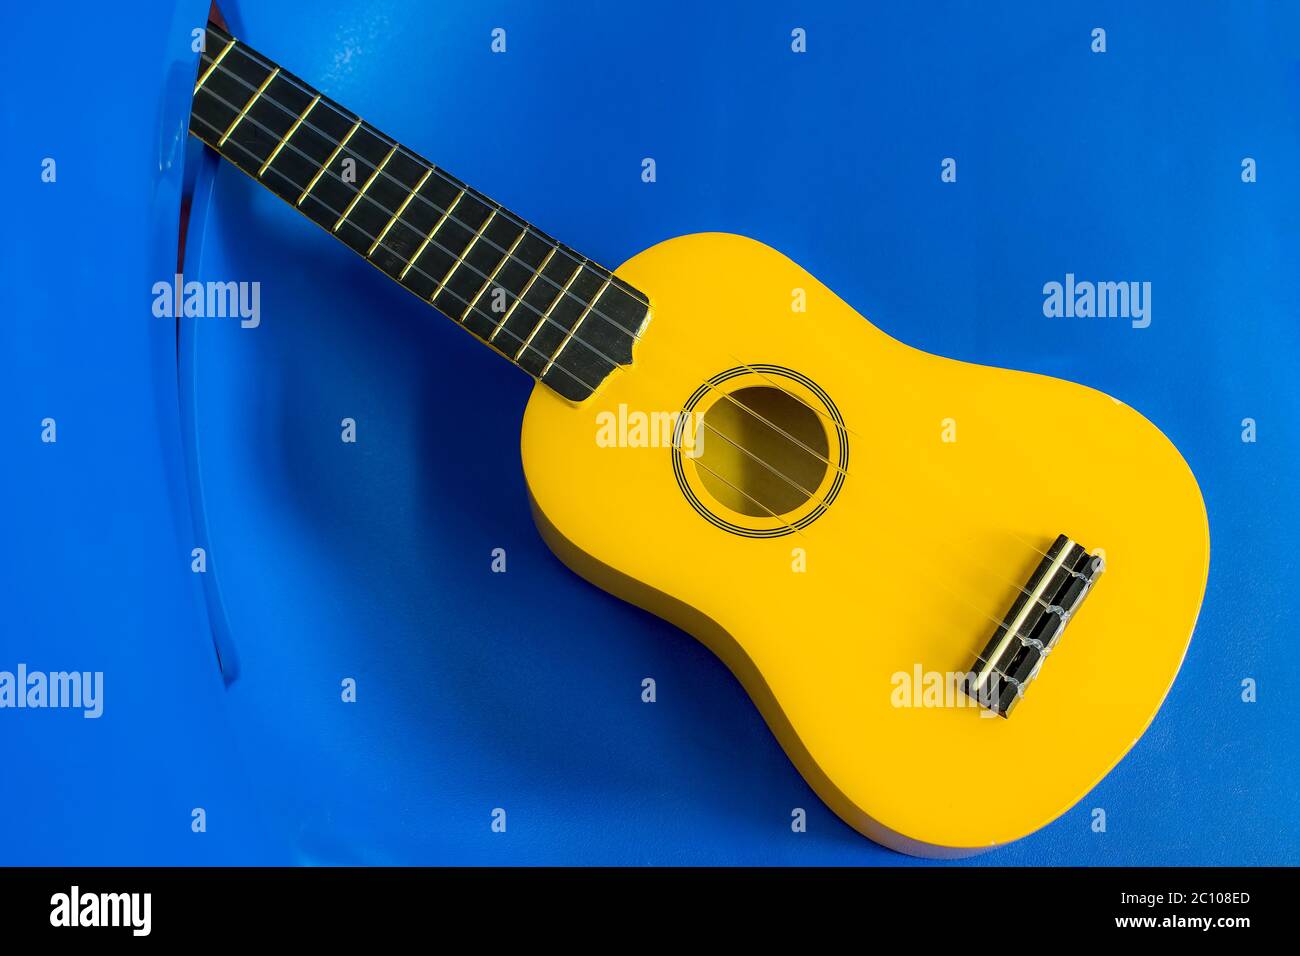 Yellow ukulele. Child uke on a blue plastic kids chair background. Musical instrument for children. Brightly colored ukulele for fun music play. Stock Photo